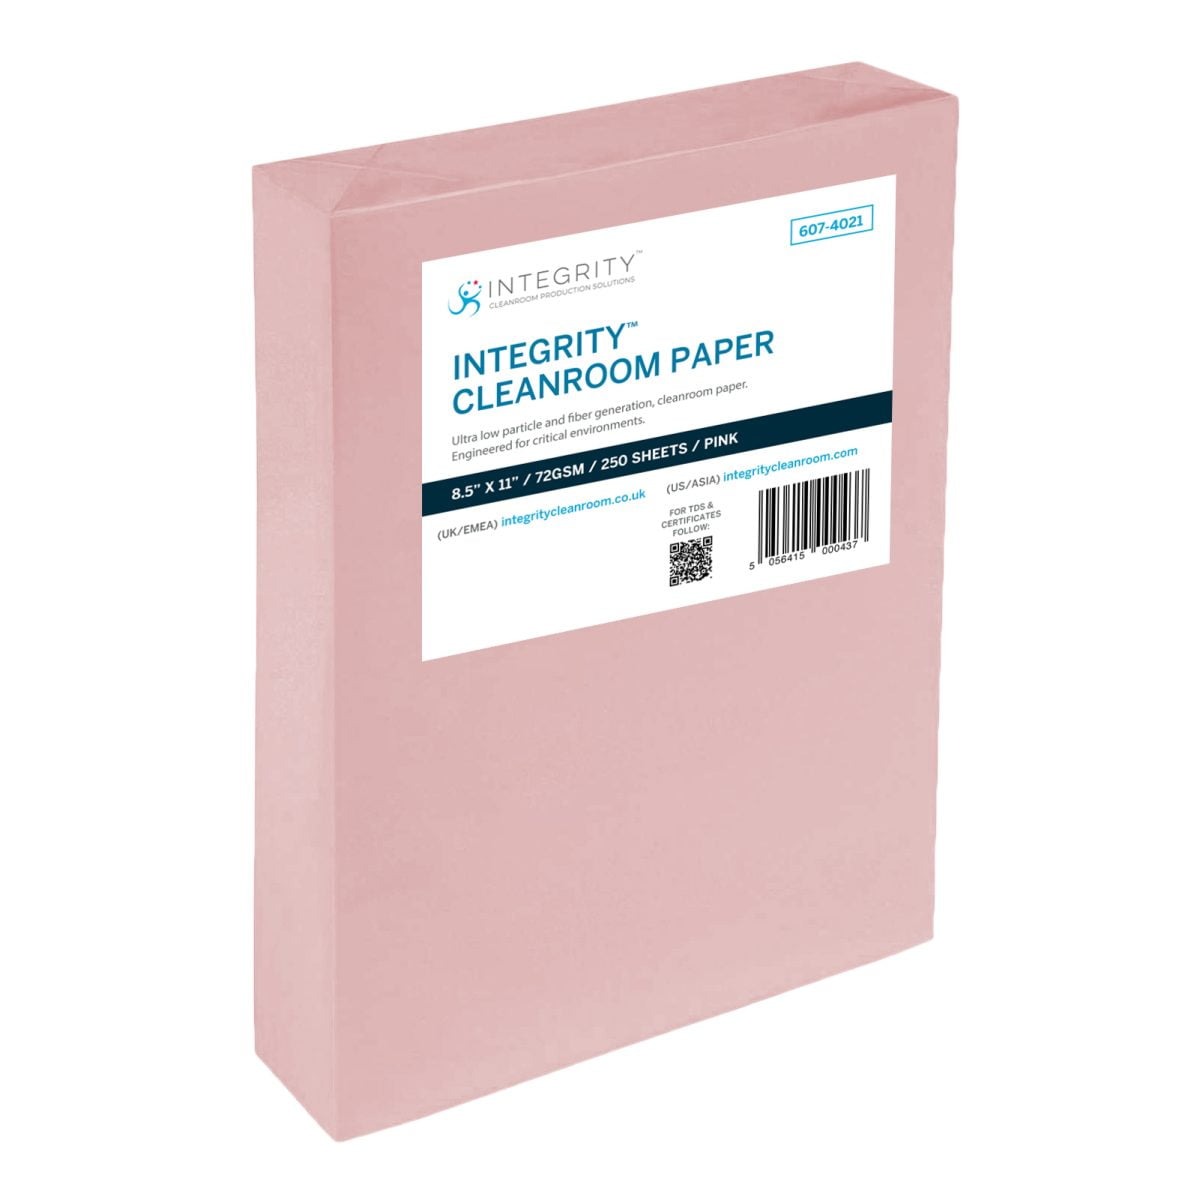 Integrity Cleanroom Paper - Pink